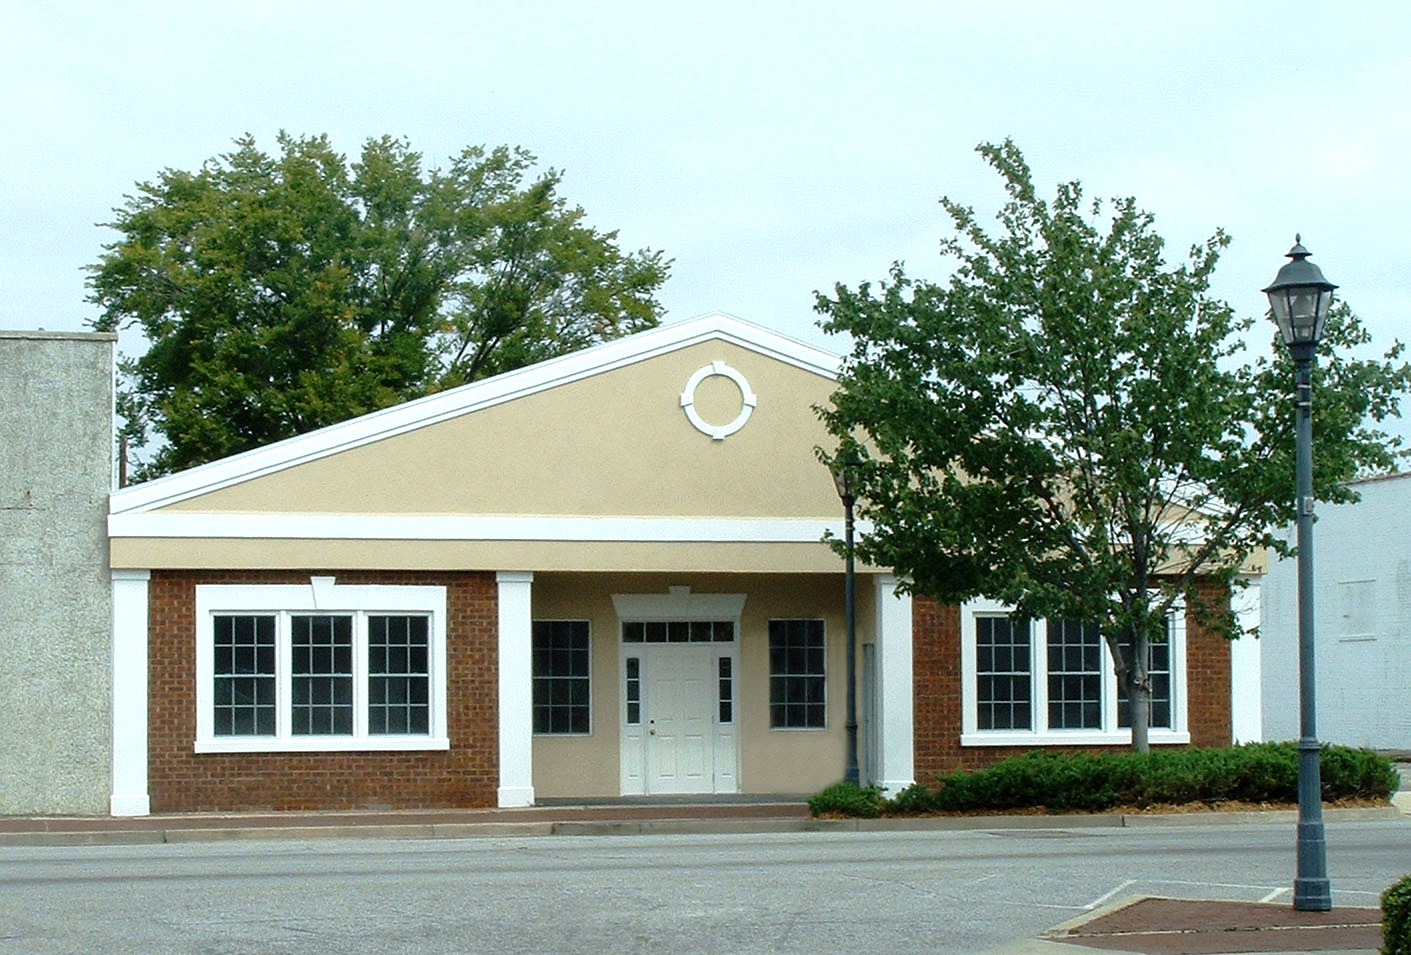 Anderson Law Firm 265 W Evans St, Florence, SC 29501 - YP.com